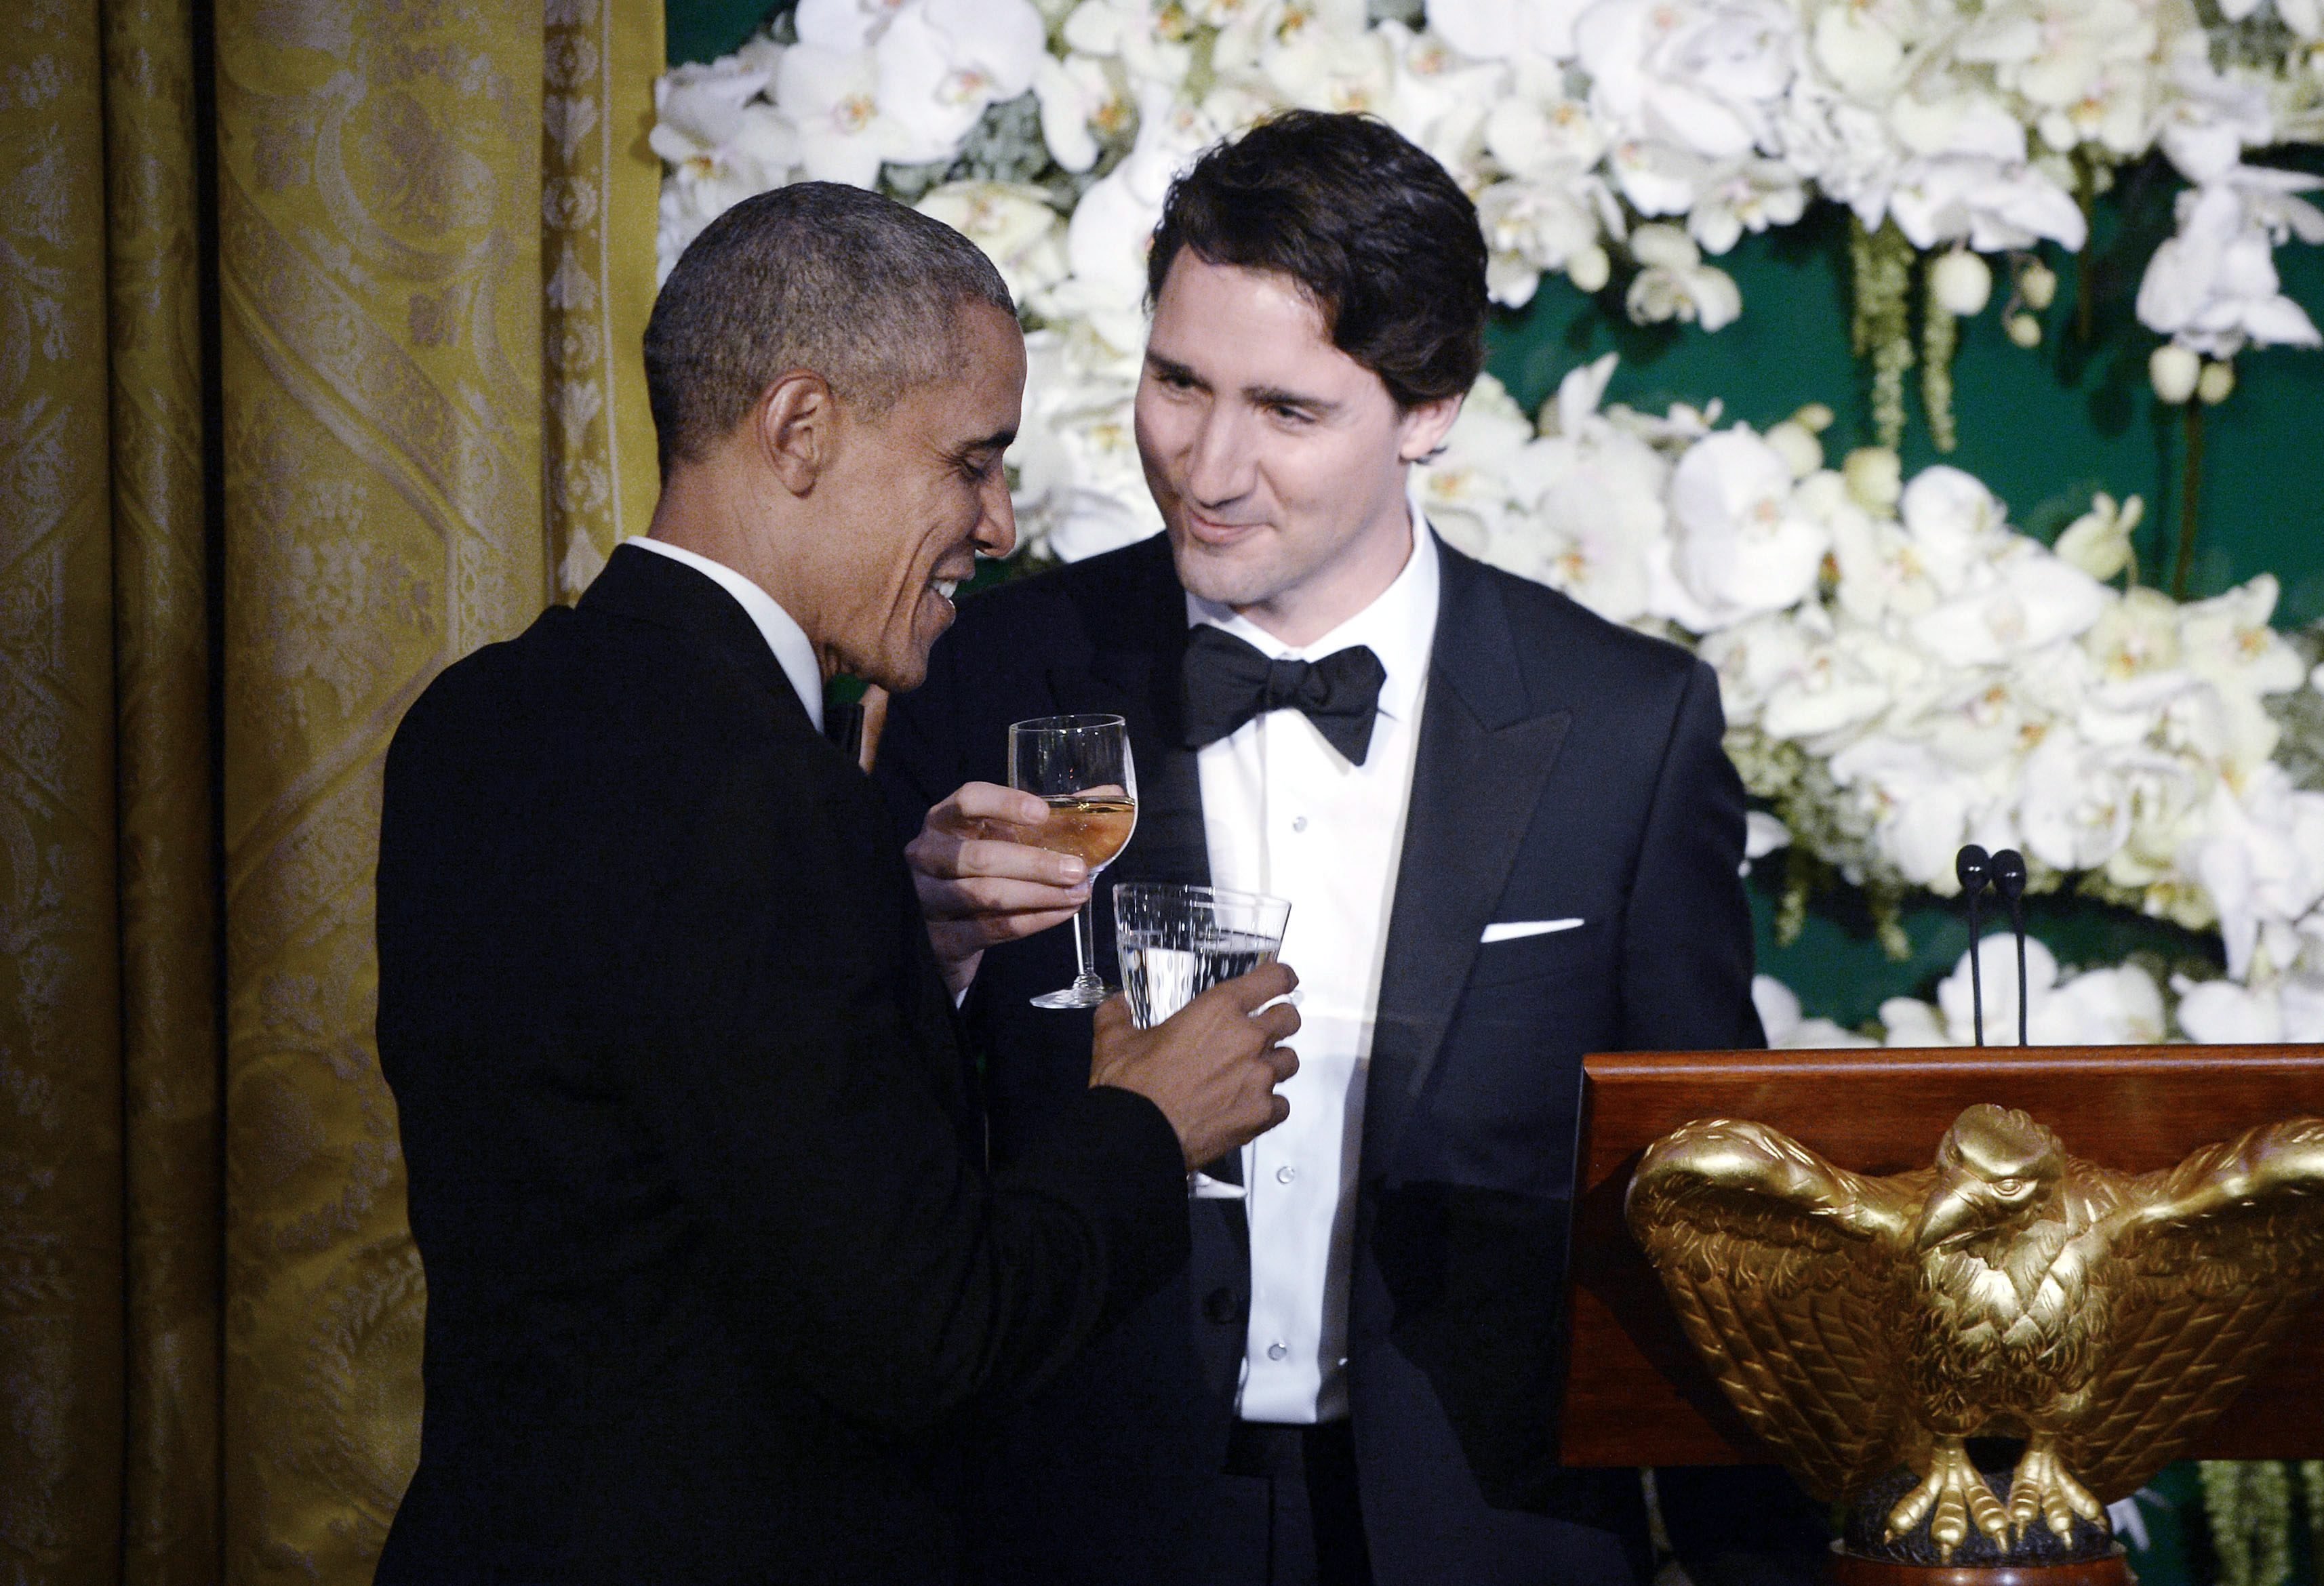 President Barack Obama, left, and  Canadian Prime Minister Trudeau exchange toasts during a state dinner at the White House, in Washington, DC, March 10, 2016. (Olivier Douliery—Pool/EPA)